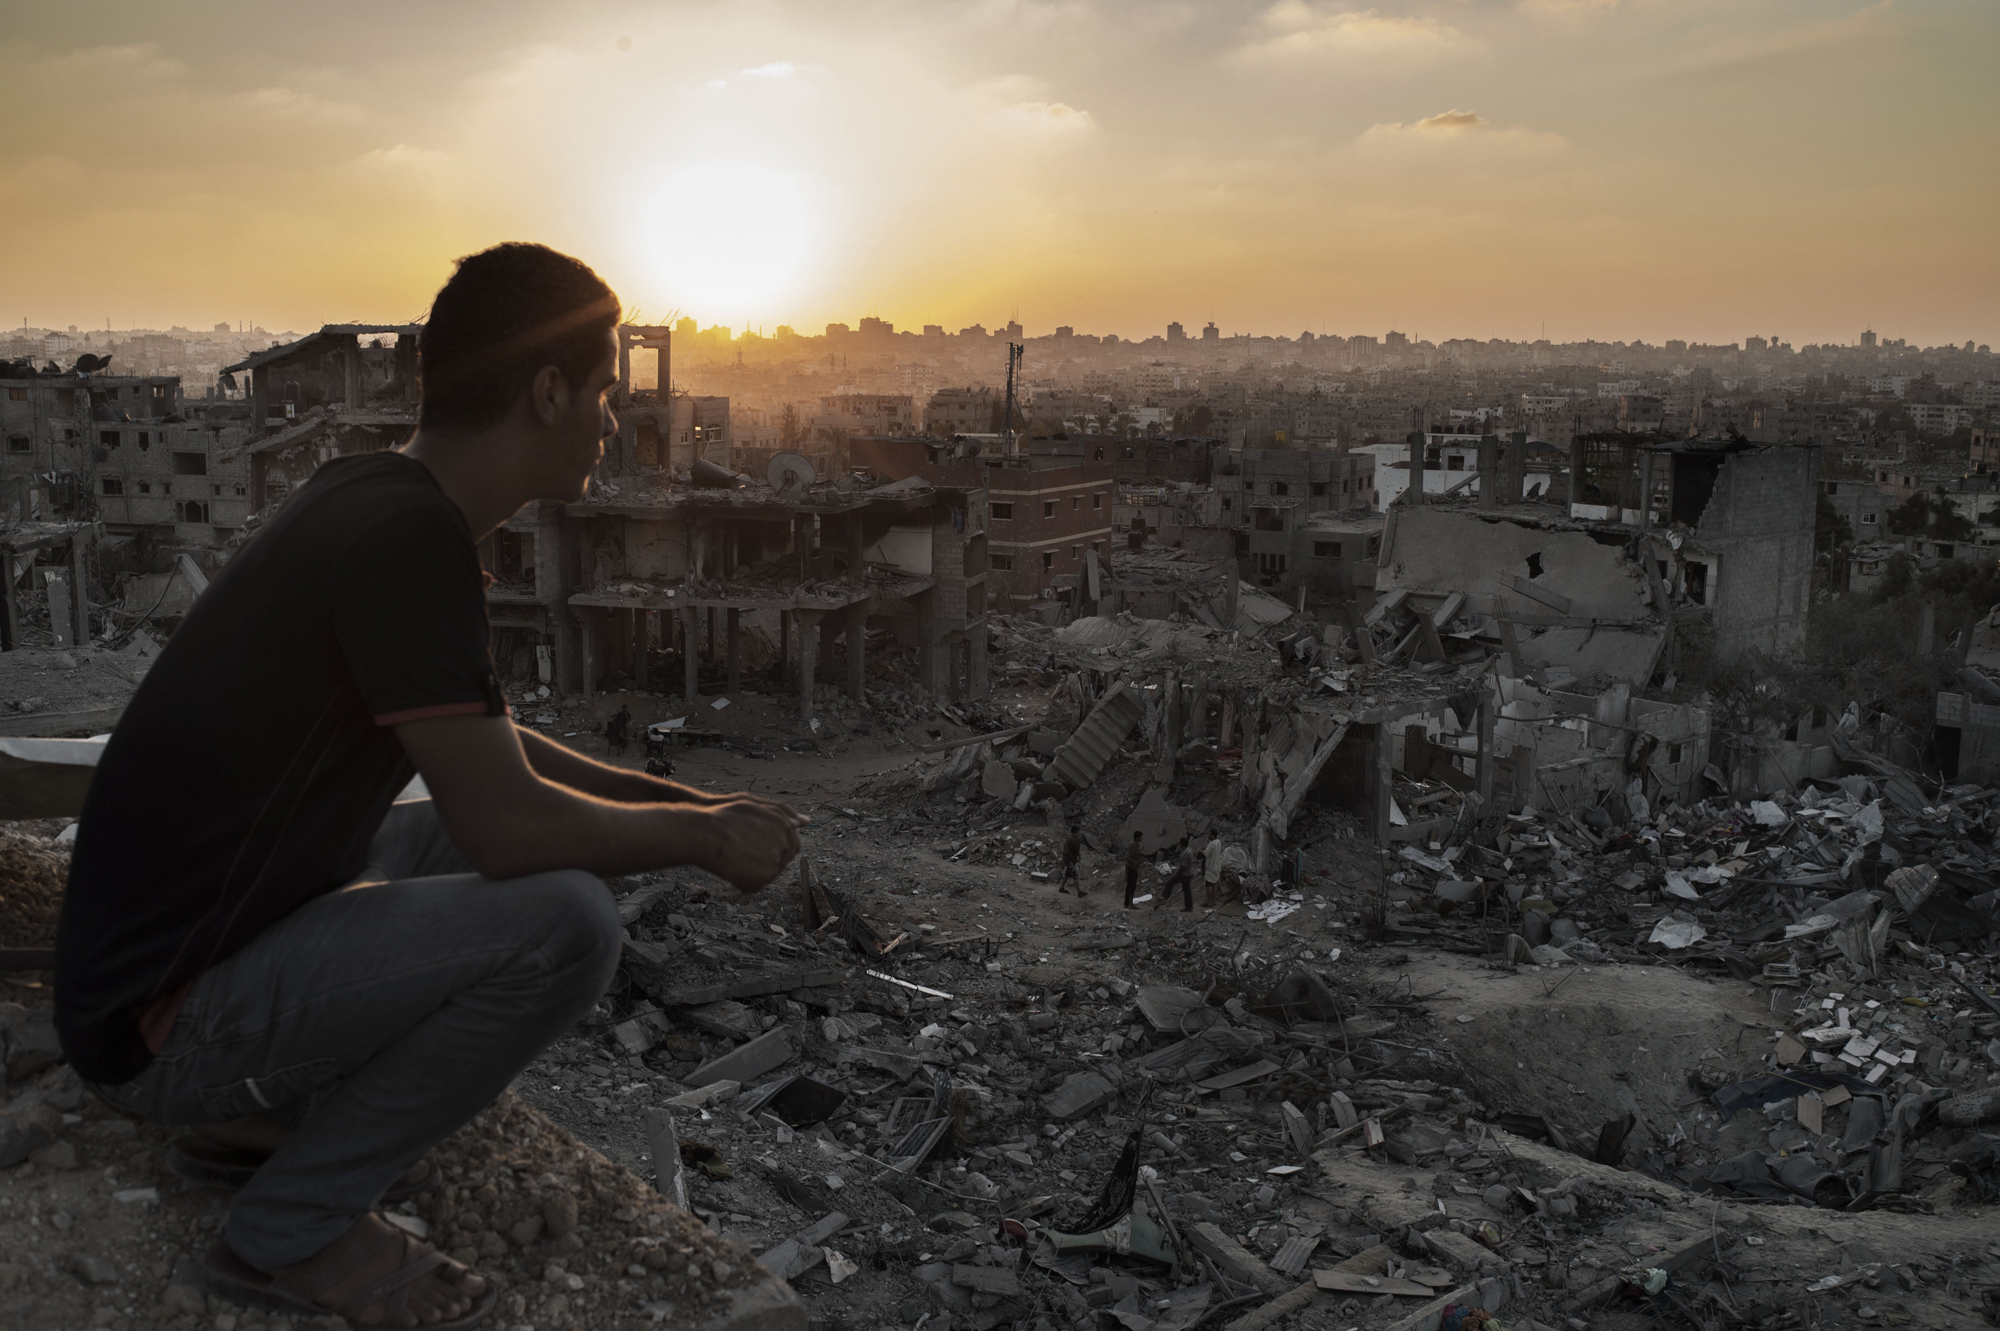 A Palestinian man looks at heavy destruction during a 72 hours cease-fire in Al Shaaf neighborhood of Gaza City on Aug. 11, 2014 (Alessio Romenzi for TIME)